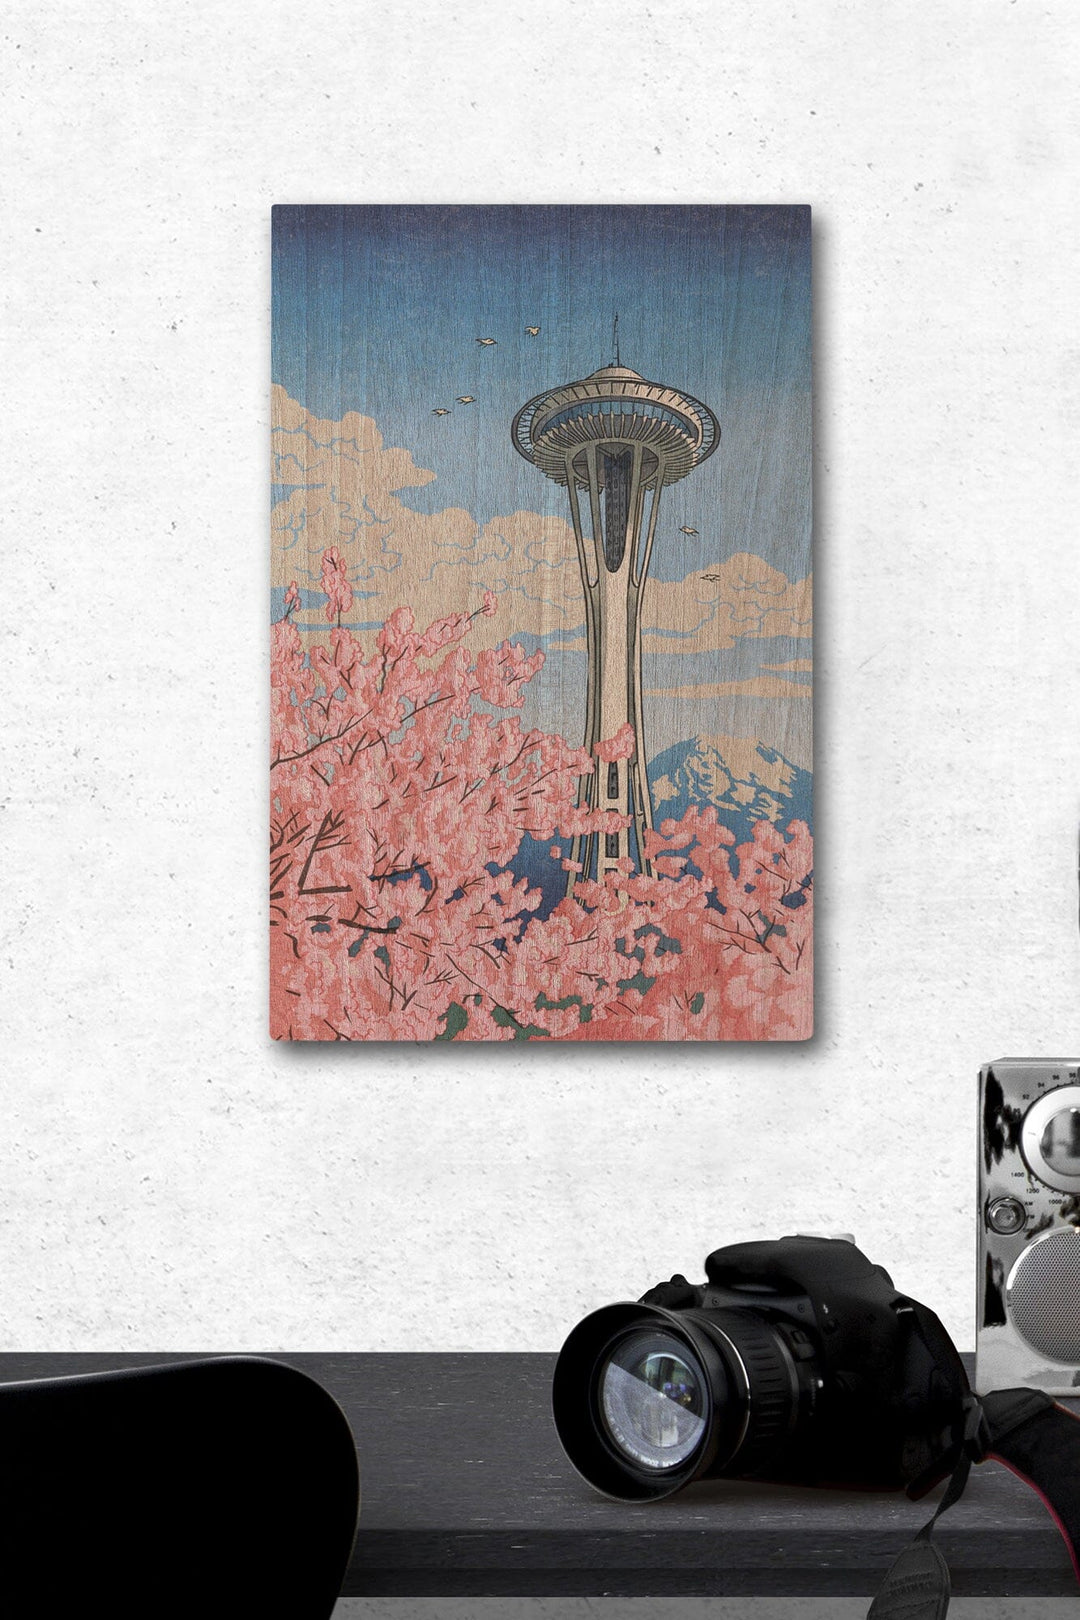 Seattle, Washington, Space Needle, Cherry Blossoms Woodblock, Wood Signs and Postcards Wood Lantern Press 12 x 18 Wood Gallery Print 